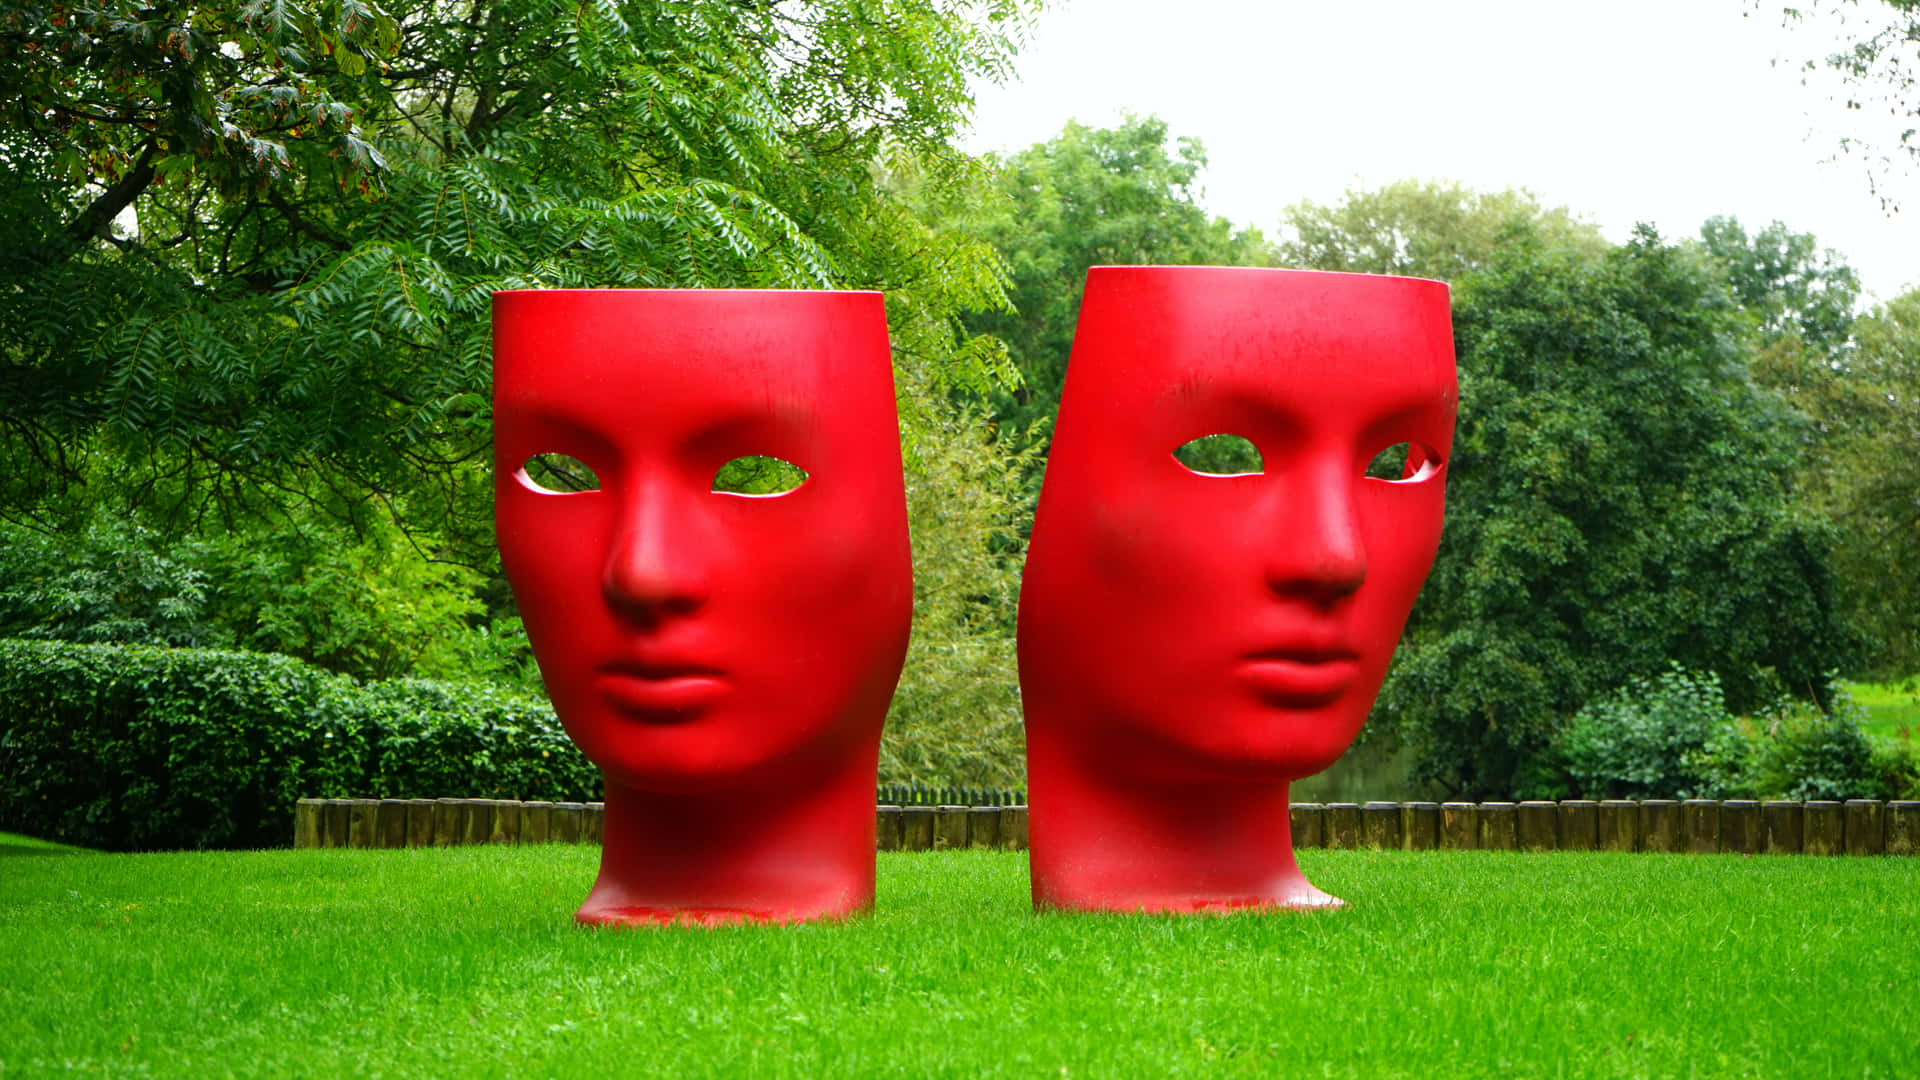 Two Red Sculptures In The Grass